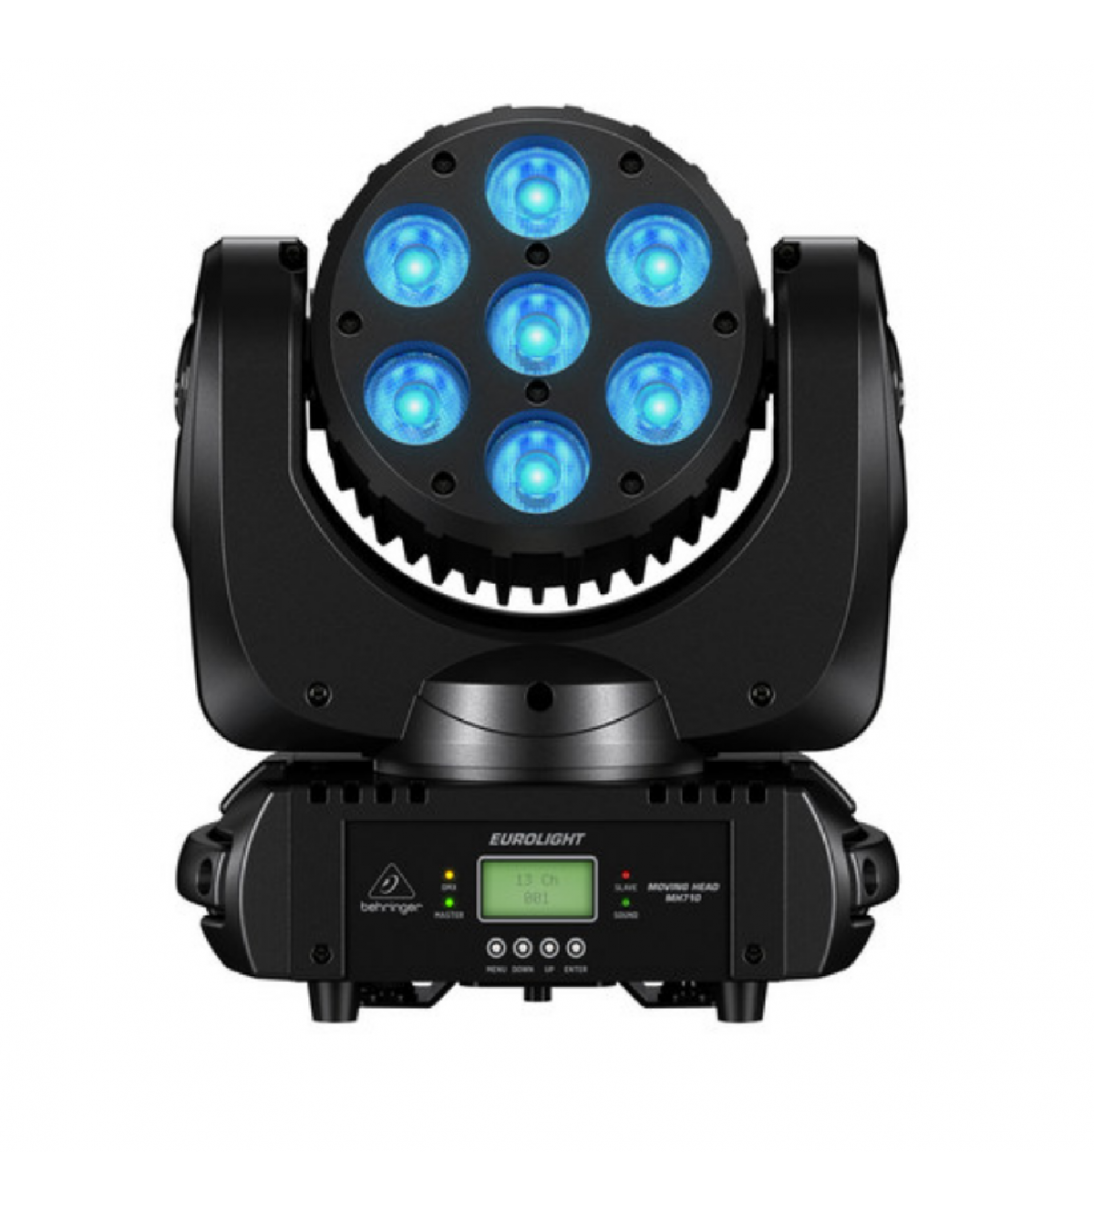 MH710 Moving Head